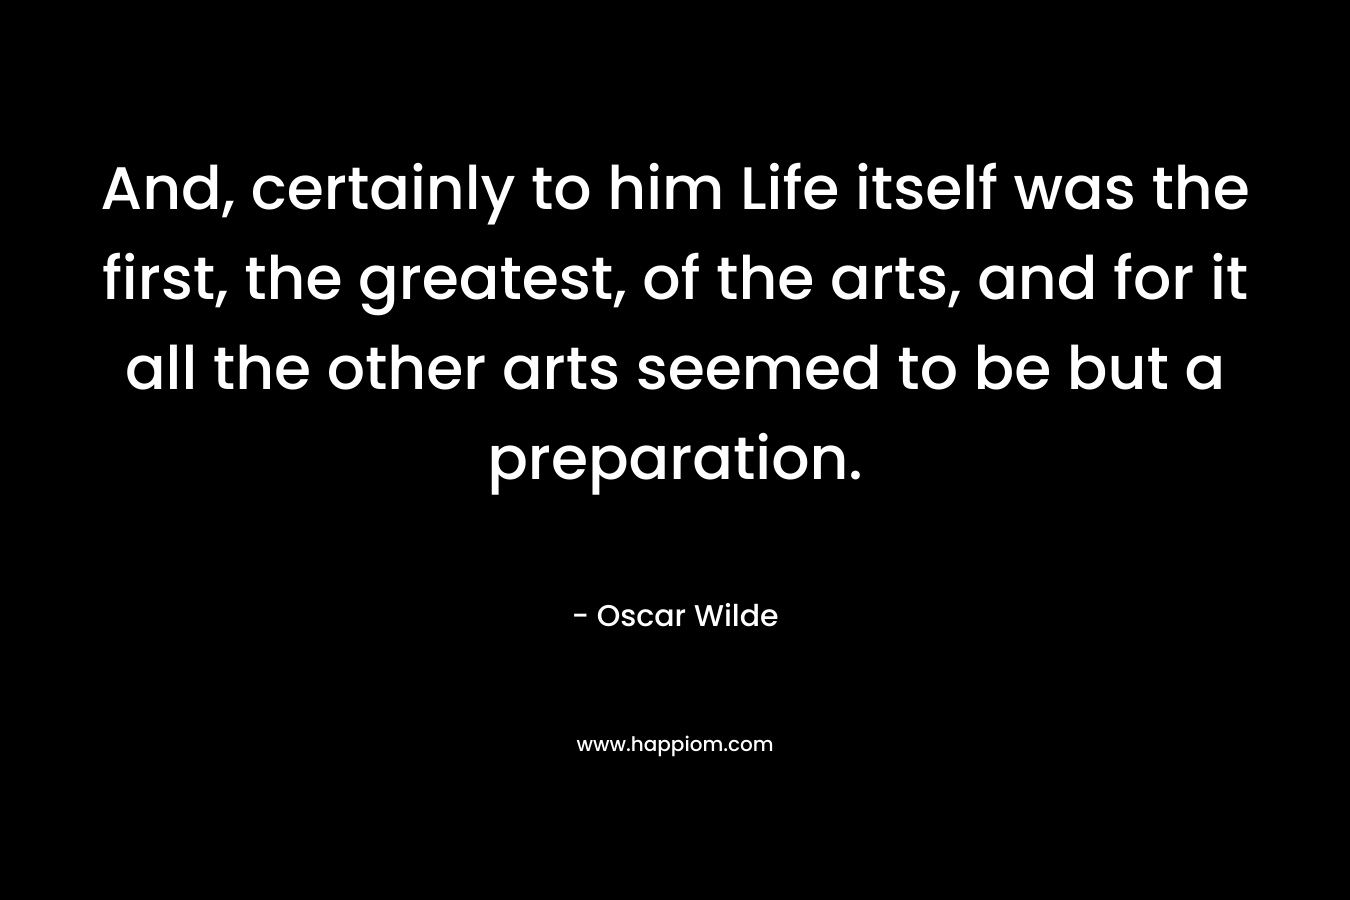 And, certainly to him Life itself was the first, the greatest, of the arts, and for it all the other arts seemed to be but a preparation.